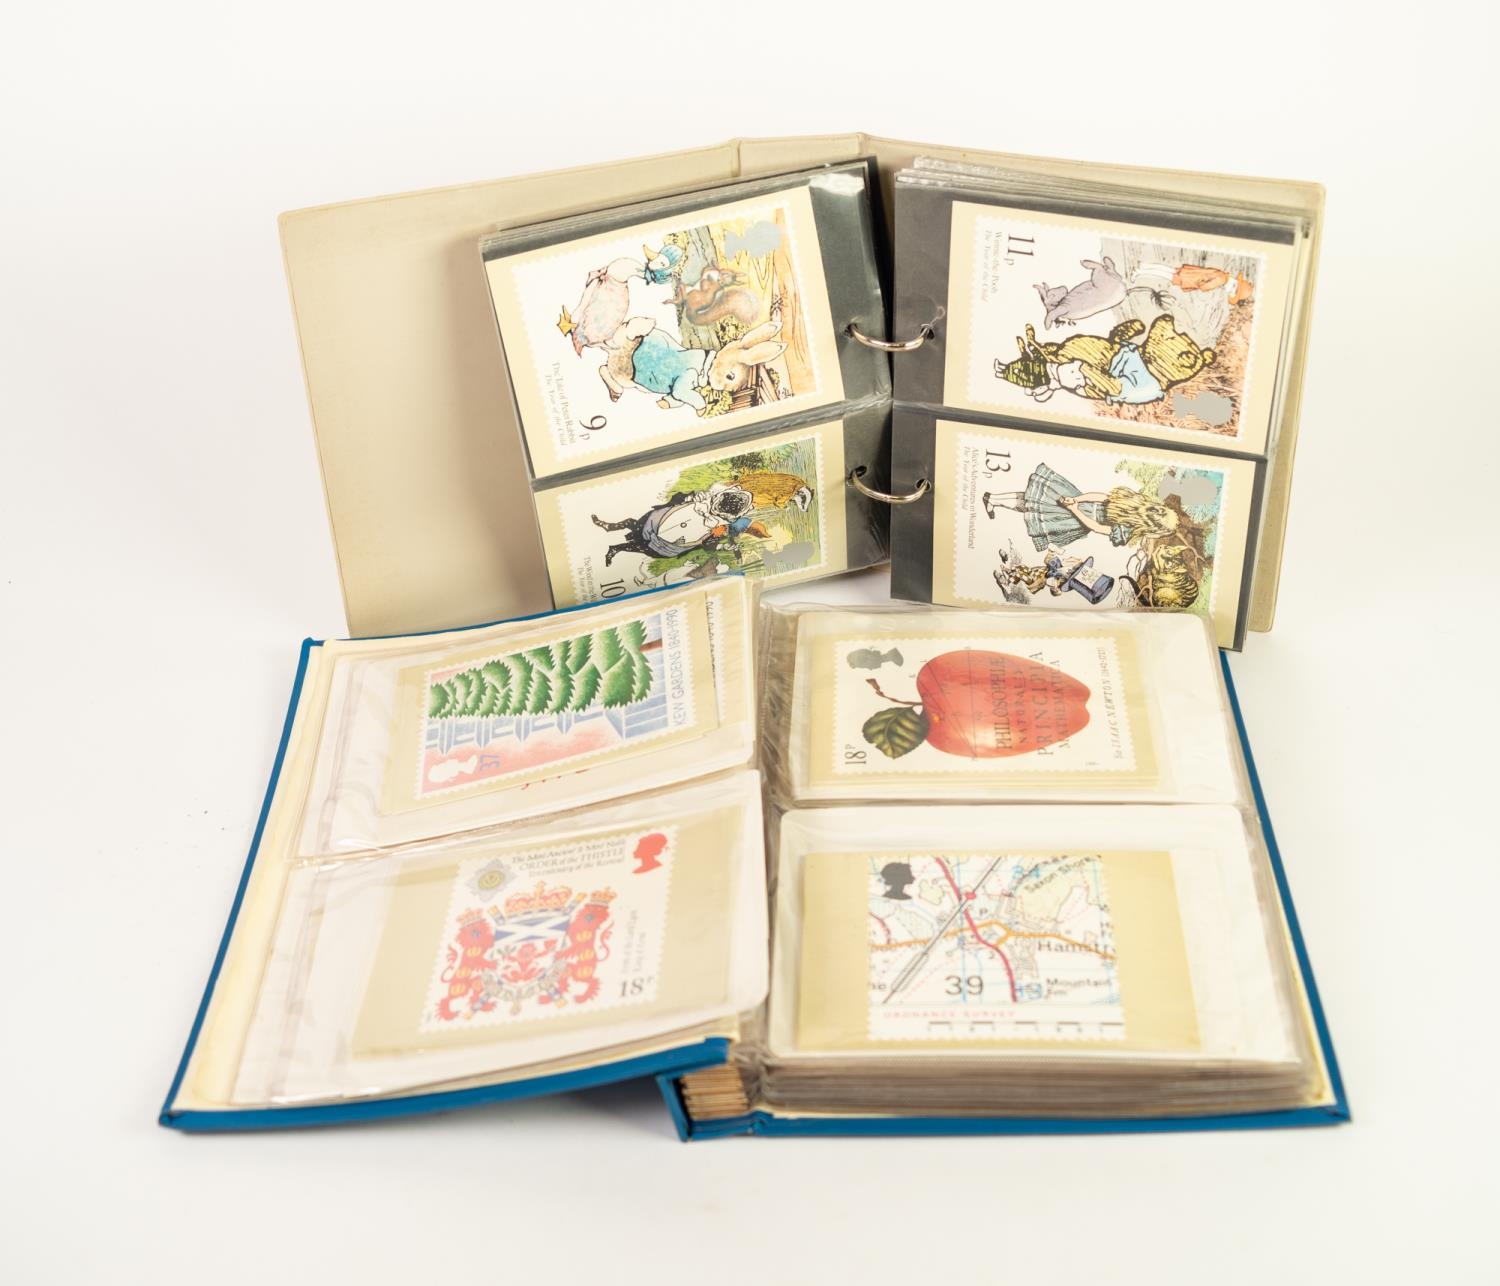 FIRST DAY COVERS - BINDER CONTAINING A COLLECTION OF CIRCA 1960's - 1970's FIRST DAY COVERS, and